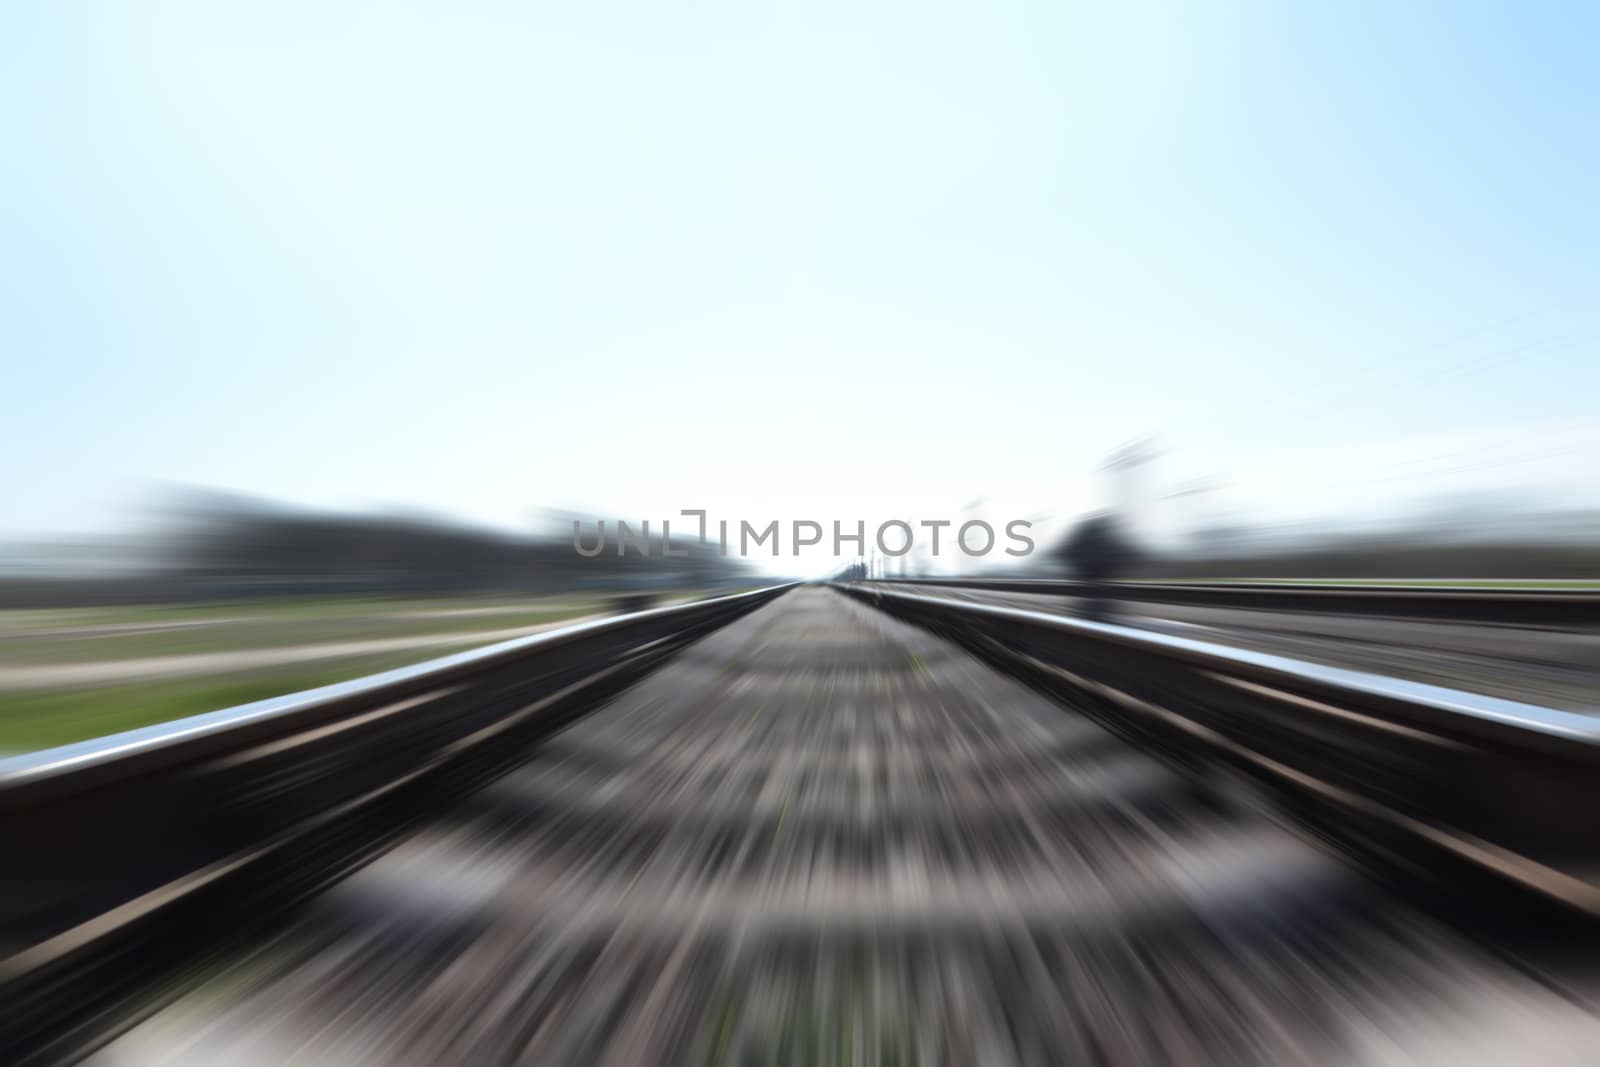 Photo of a Fast train in motion and blue sky by Lexxizm